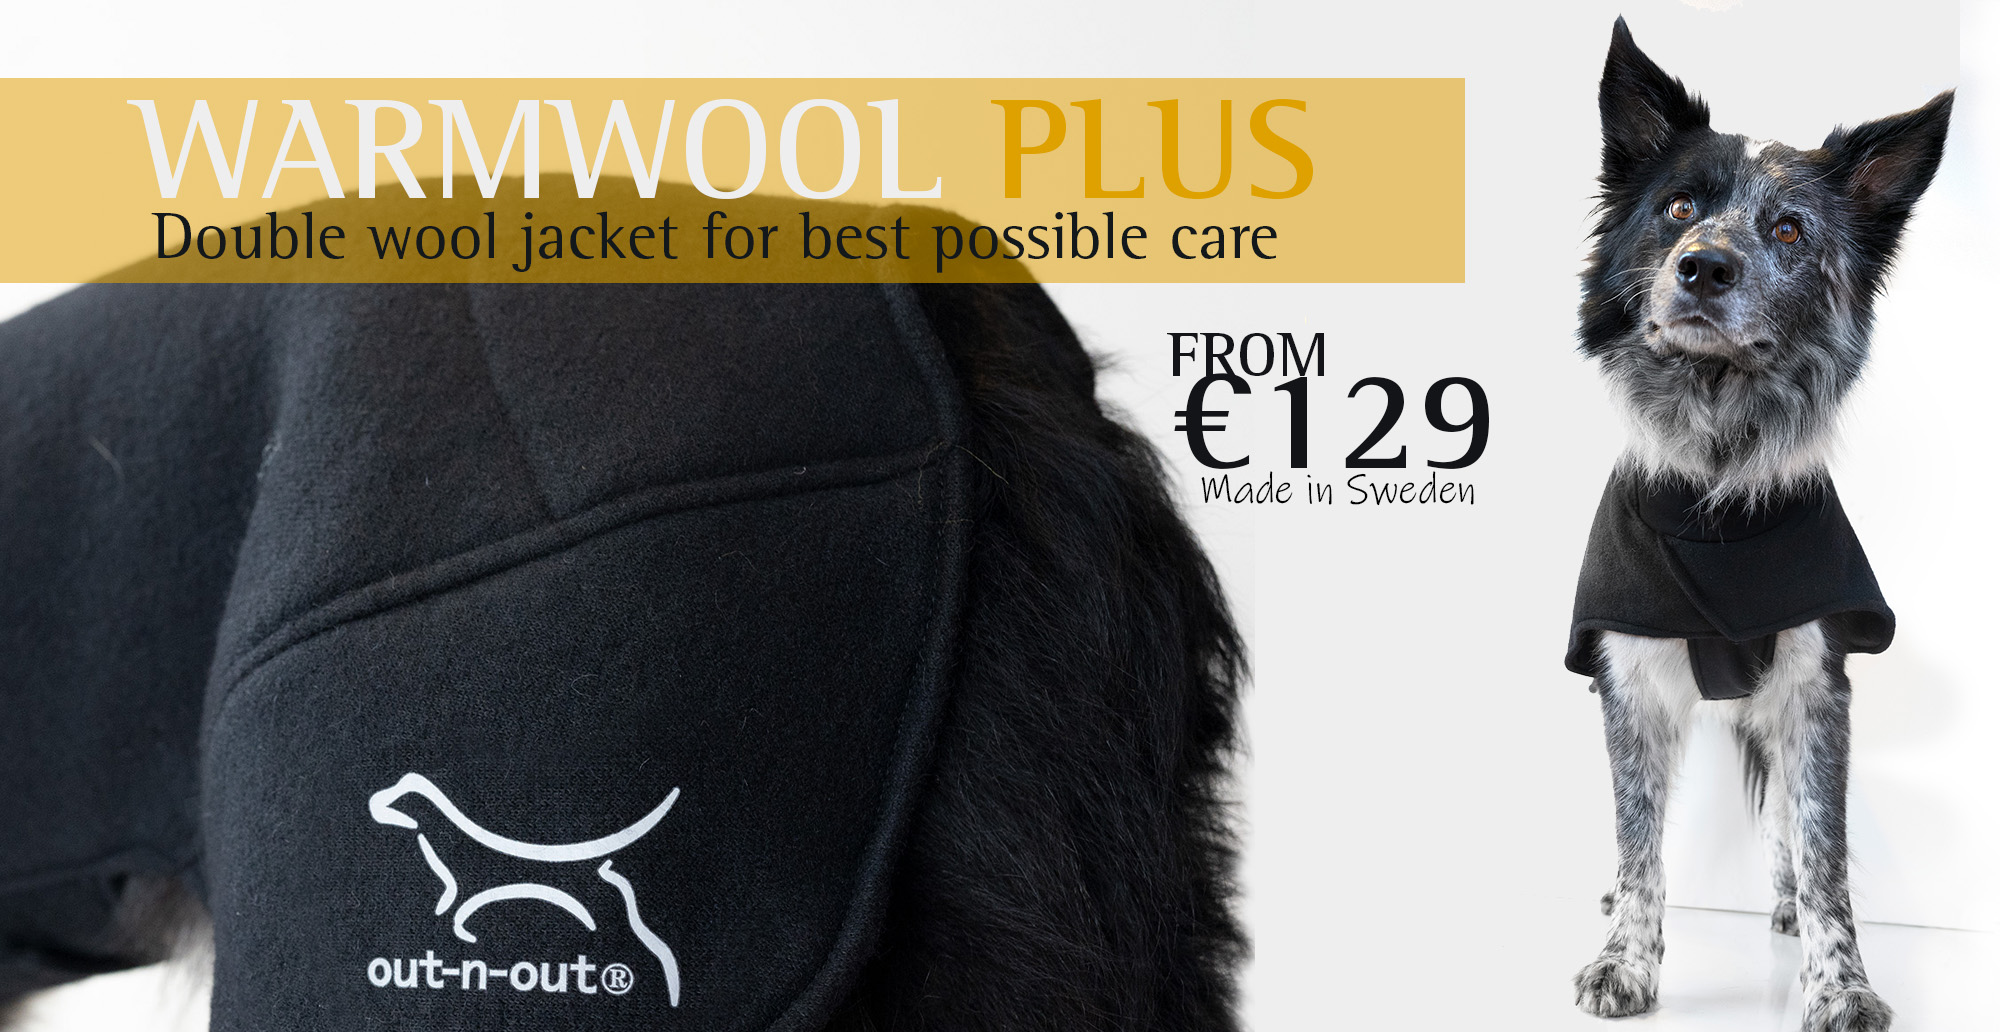 Wooljacket for your dog, read more